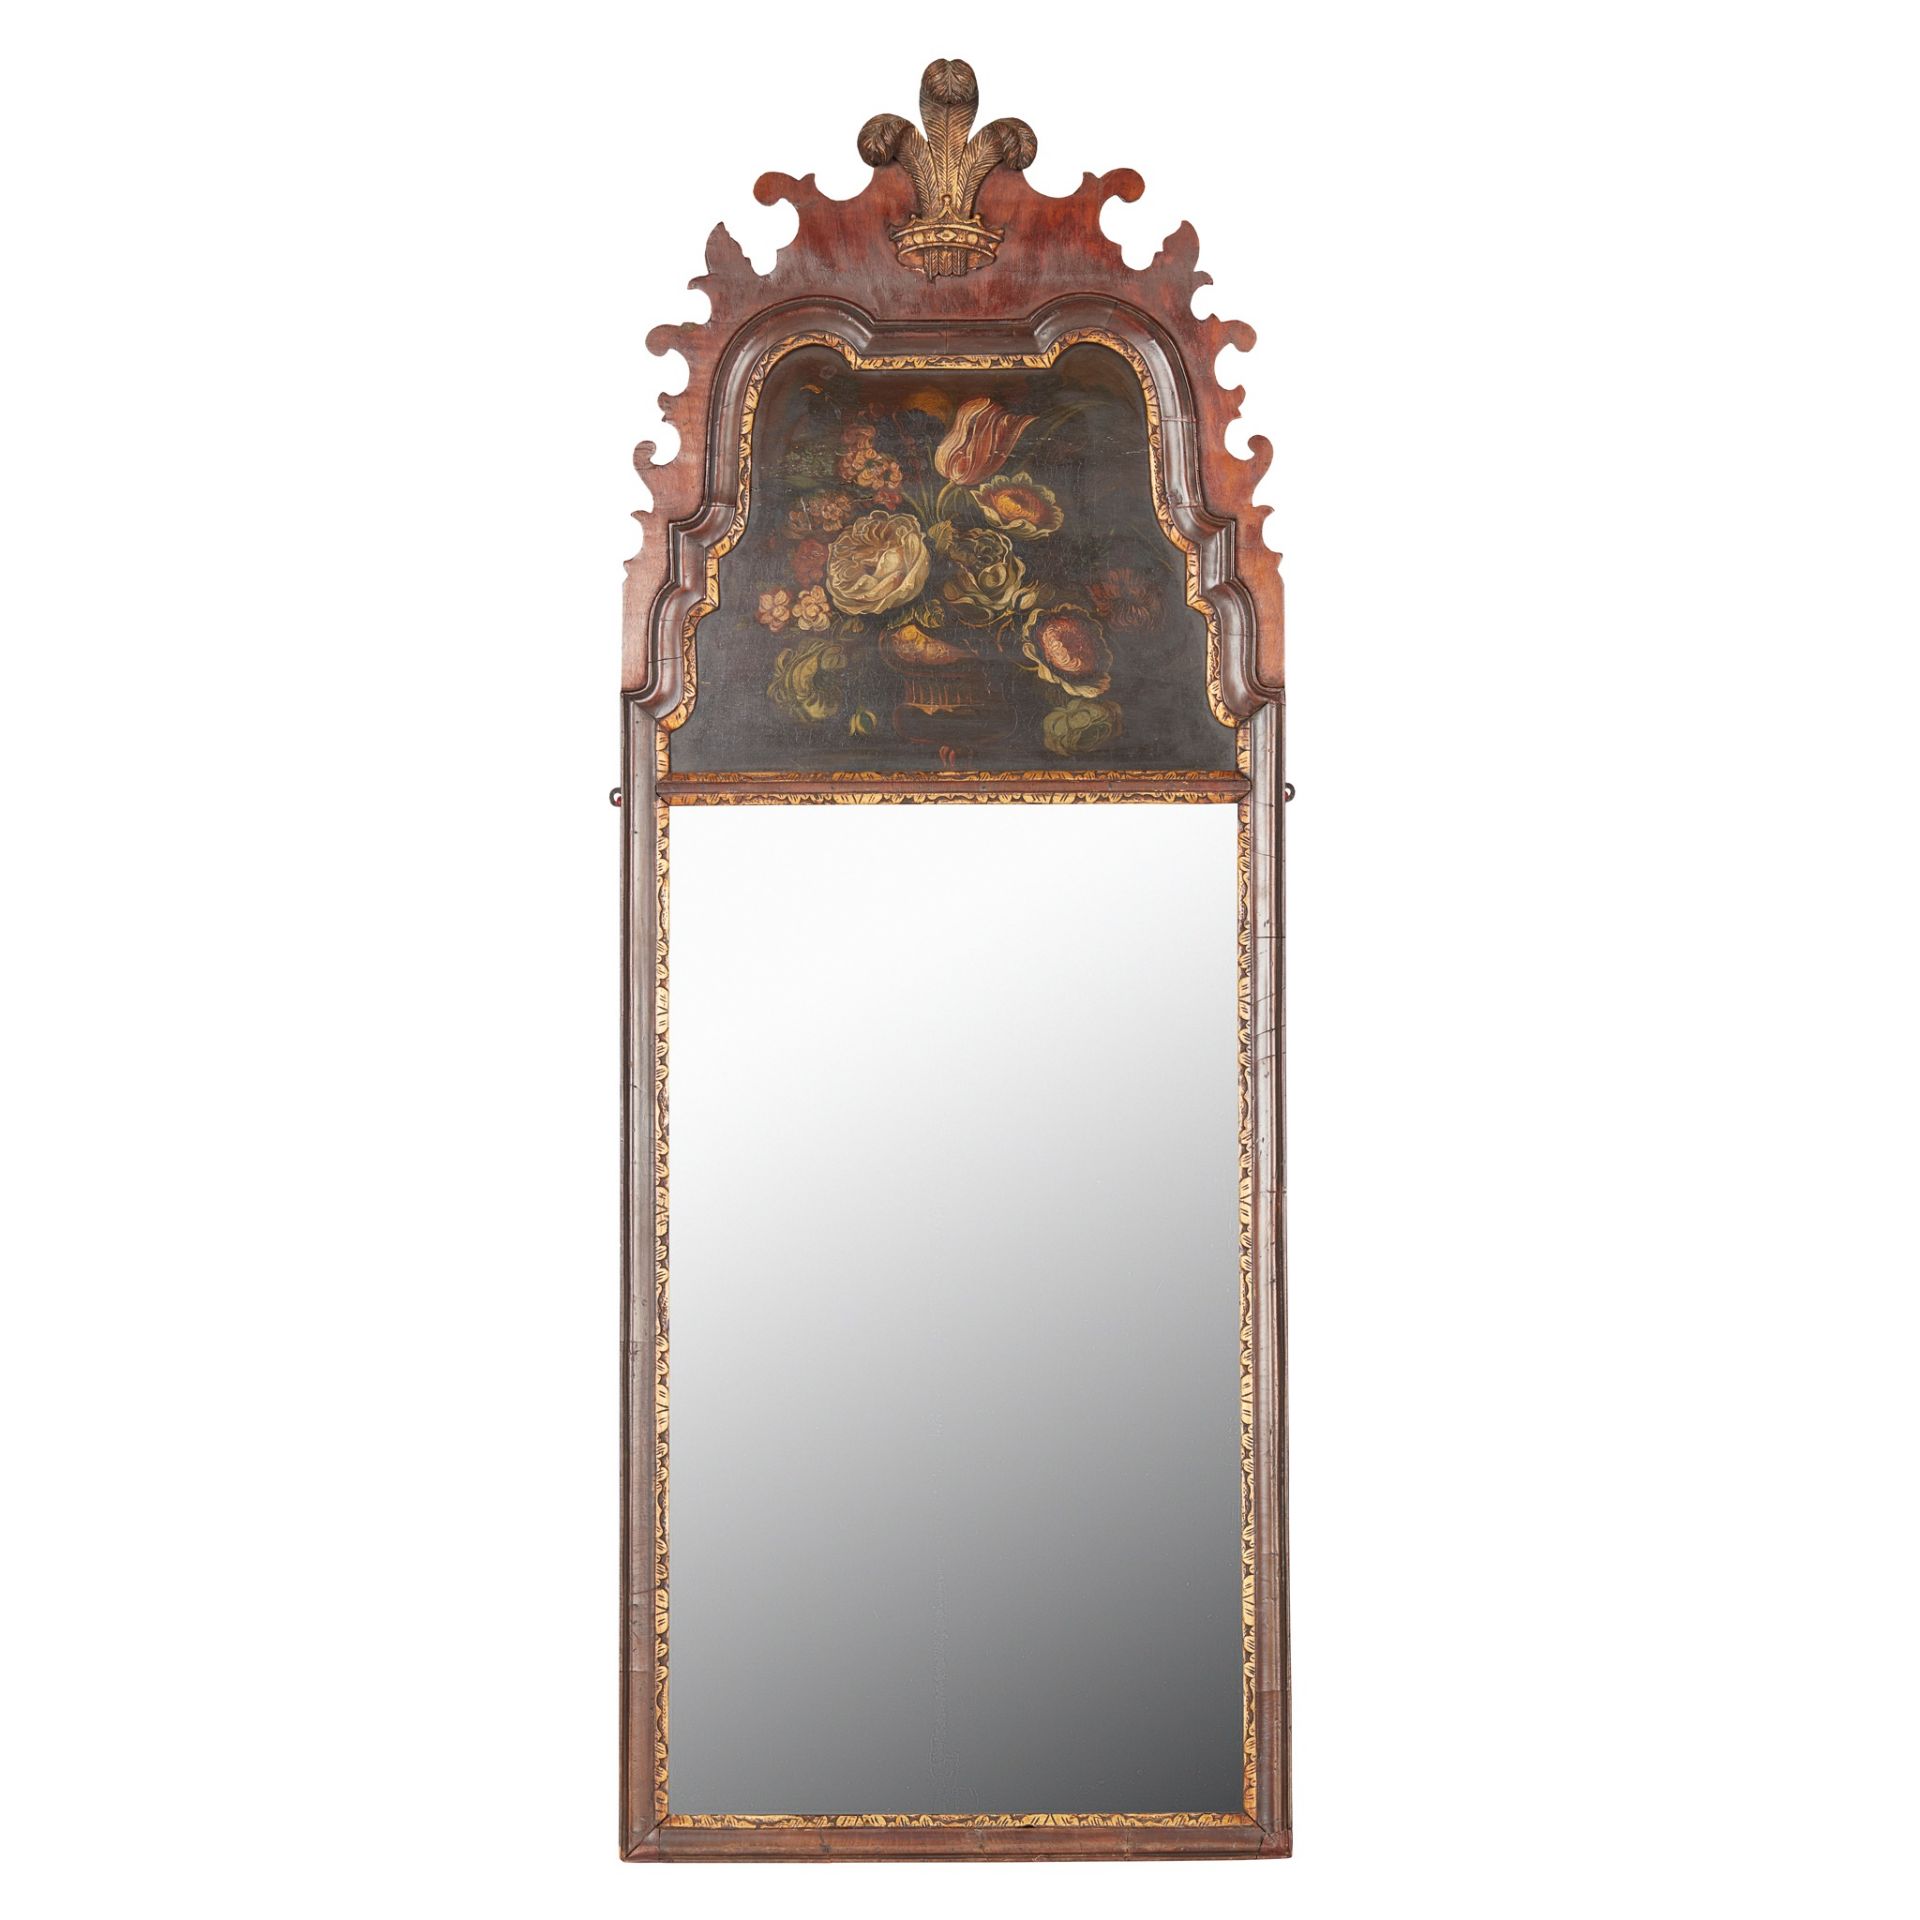 GEORGE II STYLE MAHOGANY, PAINTED, AND PARCEL-GILT MIRROR LATE 19TH CENTURY